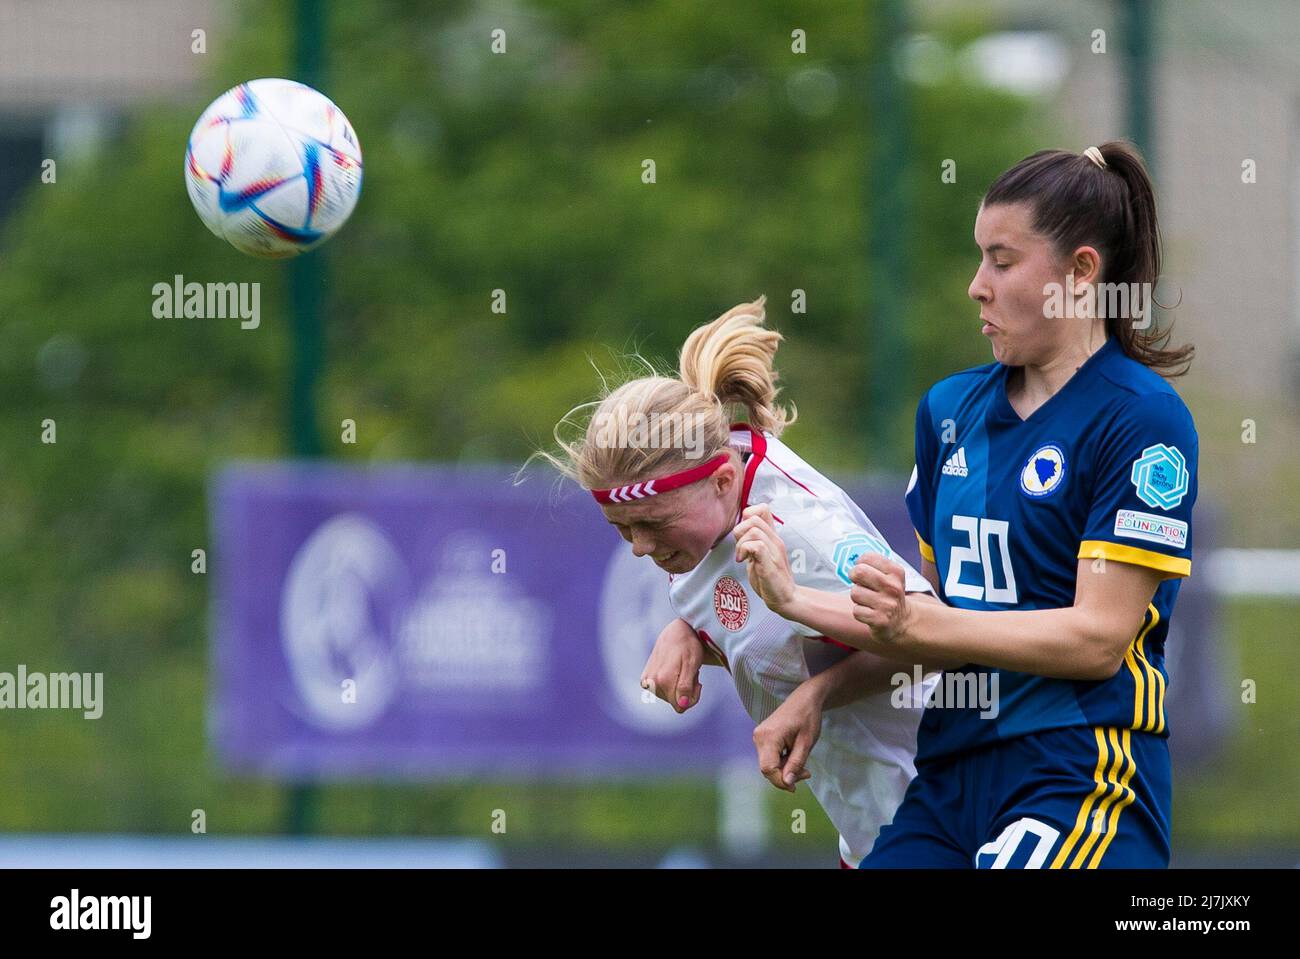 Zenica, Bosnia and Herzegovina, 6th May 2022. Pernille Sanvig of Denmark in air duel against the opposite player during the UEFA Women's Under-17 Championship 2022 match between Bosnia Herzegovina v Denmark at FF BH Training Centre in Zenica, Bosnia and Herzegovina. May 6, 2022. Credit: Nikola Krstic/Alamy Stock Photo